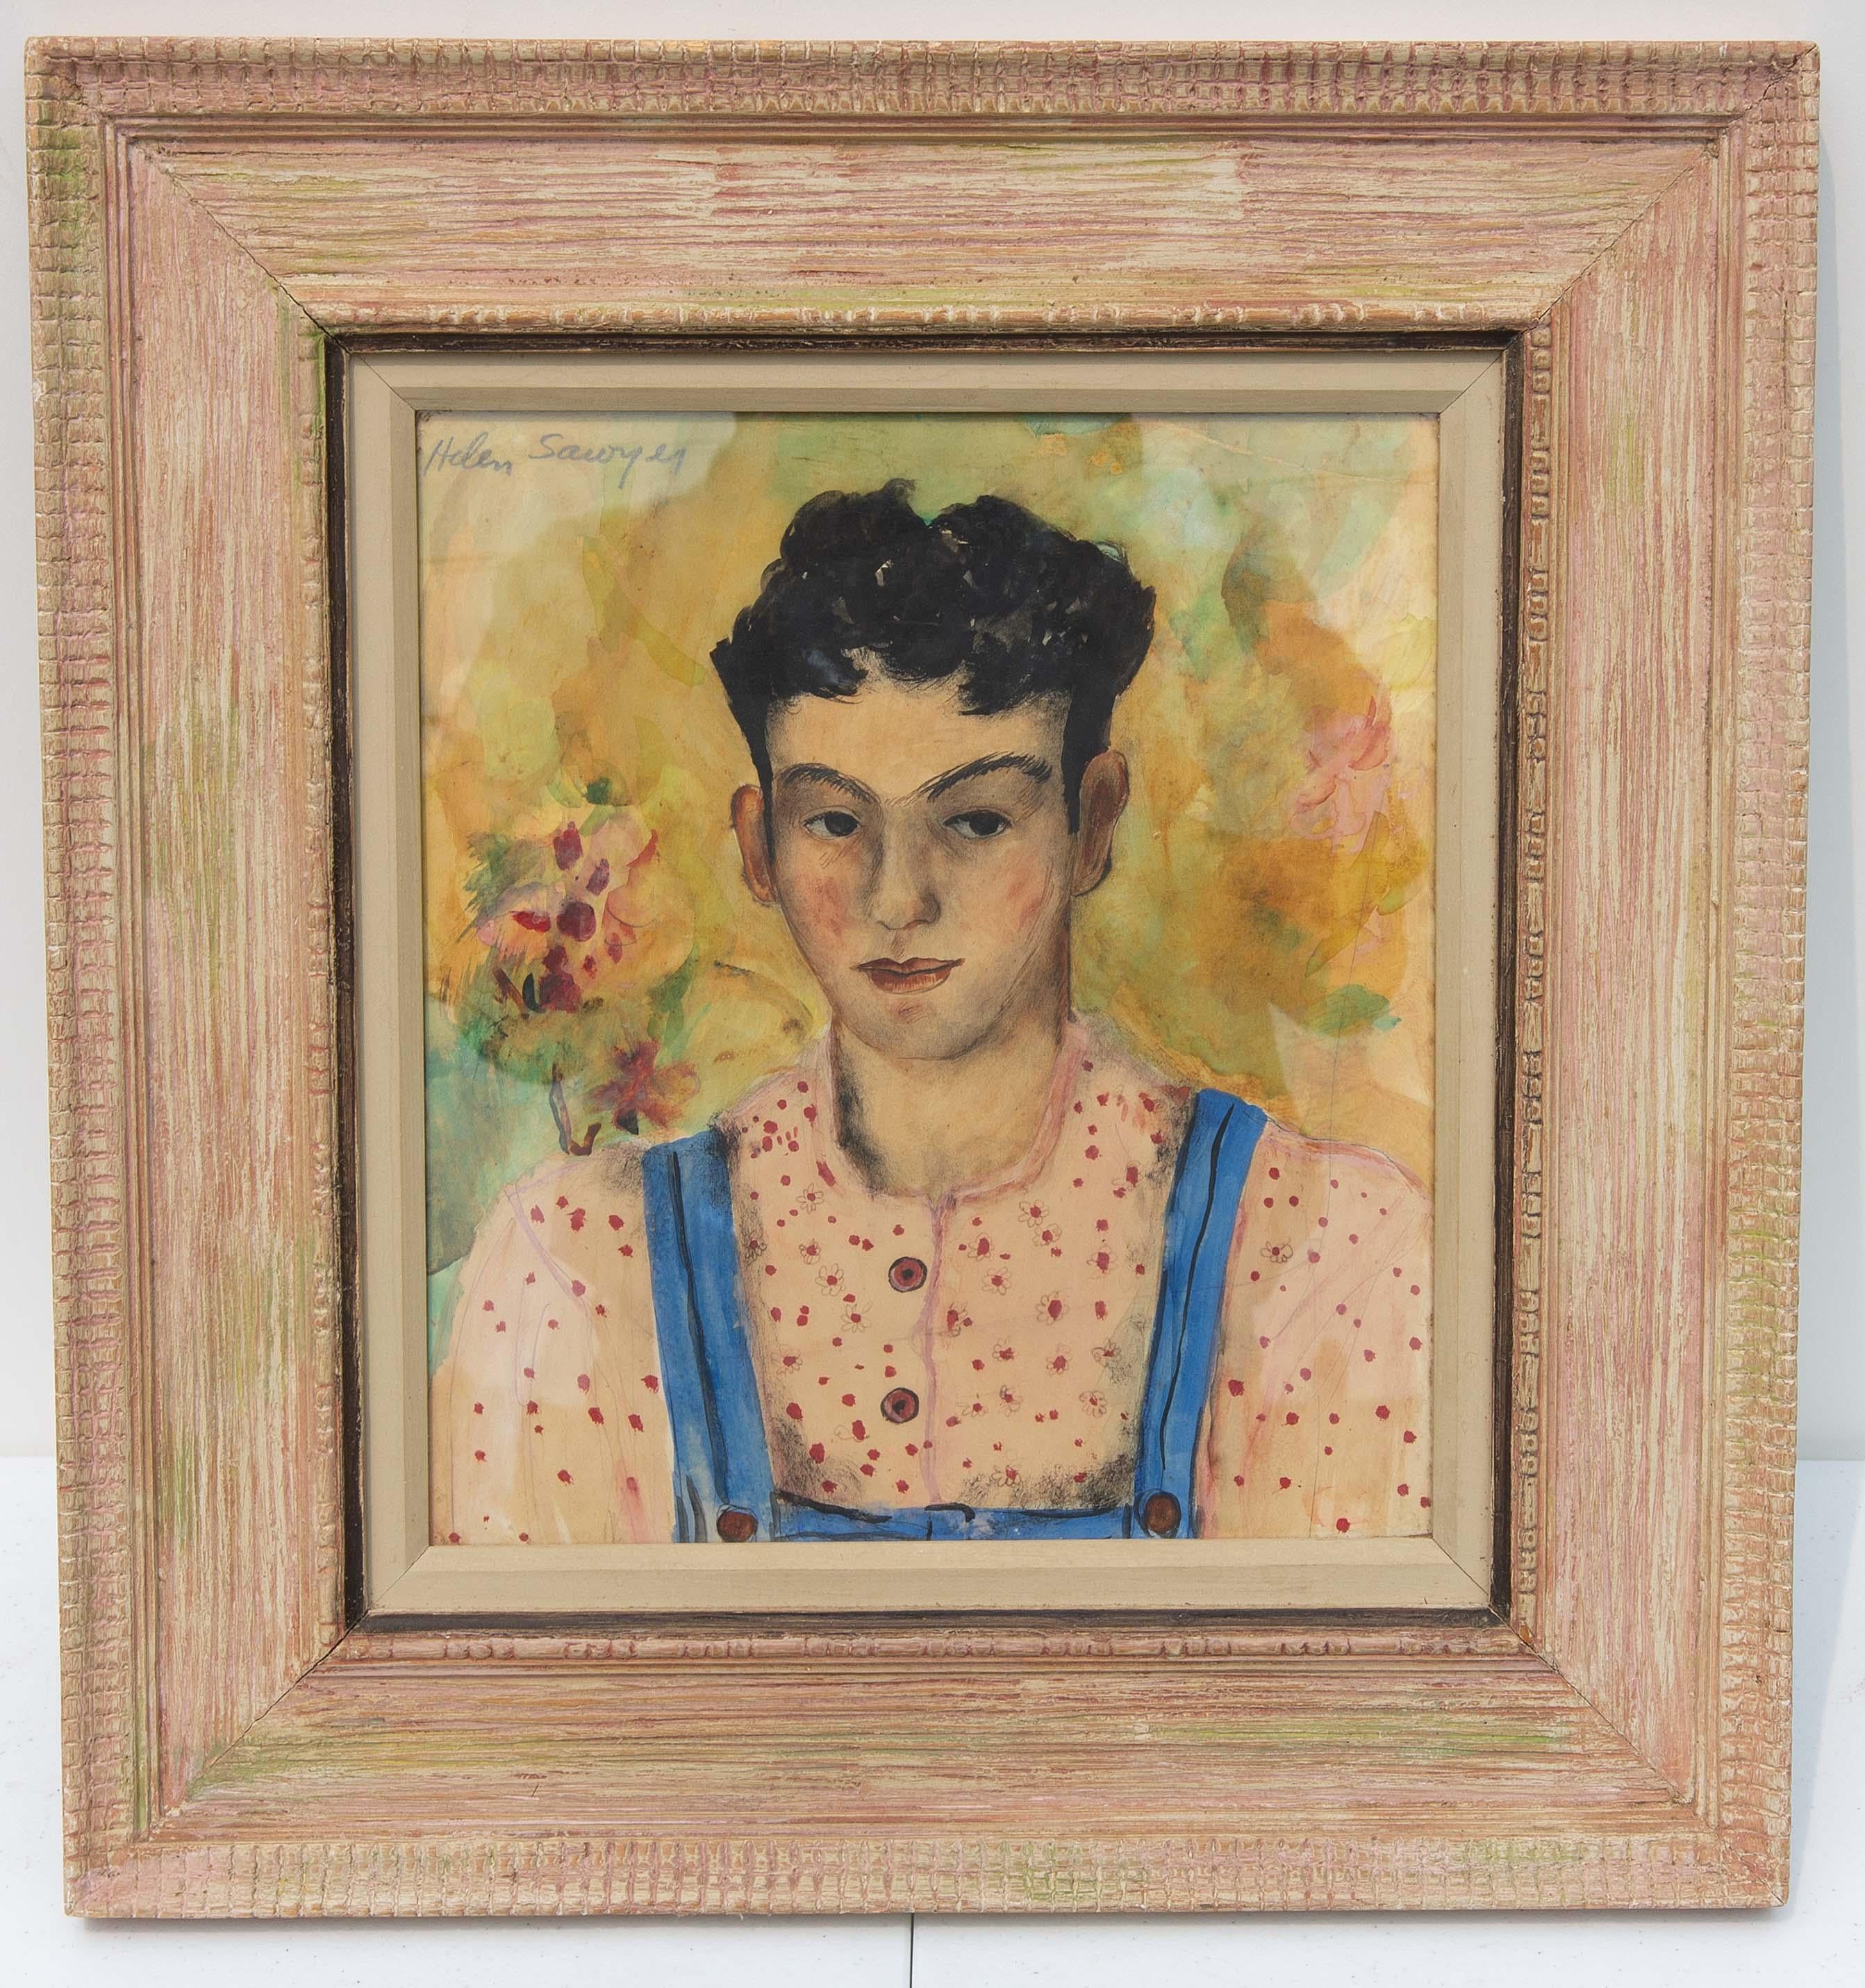 Pair of midcentury portrait paintings by Helen Sawyer (1900-1999). Both are signed, circa 1940. In excellent quality Mid-Century Modern style frames. 

Landscape and still-life painter Helen Alton Sawyer was the daughter of a prominent Washington,